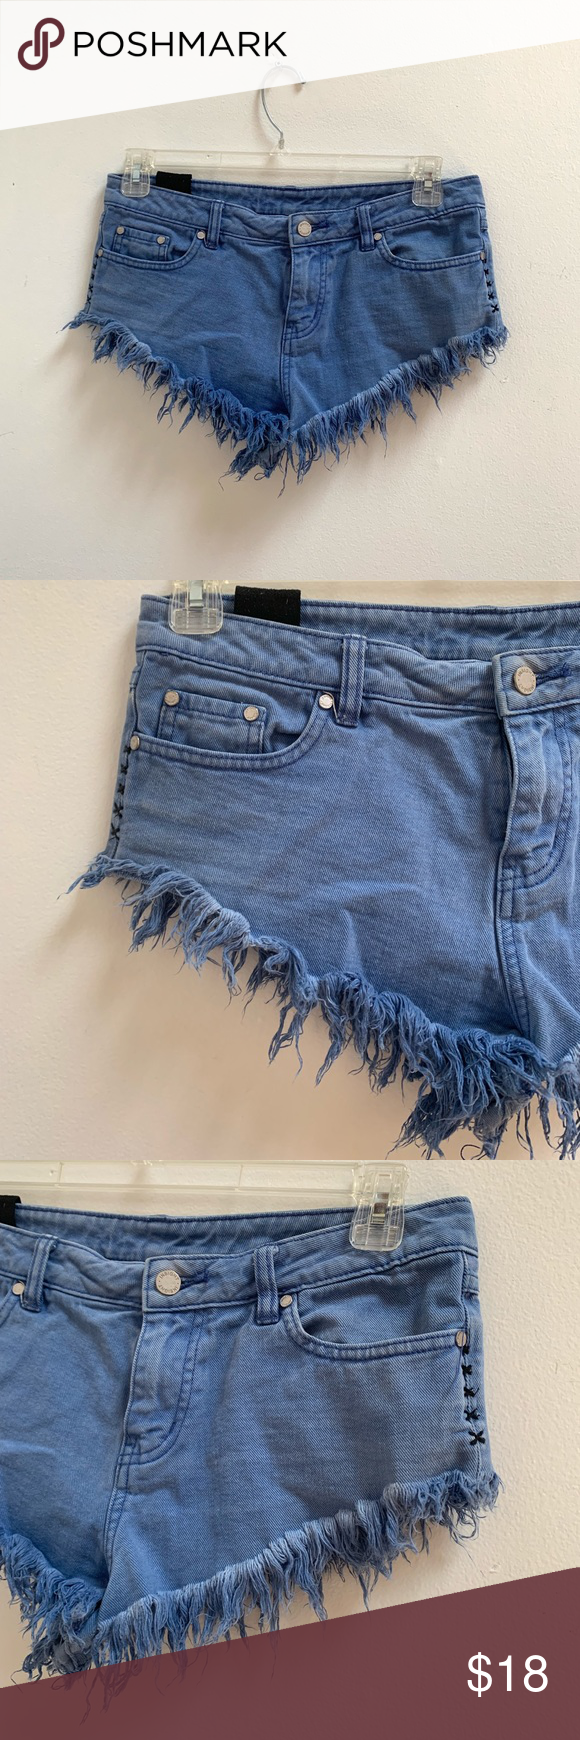 Insight denim jean cutoffs shorts size 4 blue S These are a faded royal blue col…